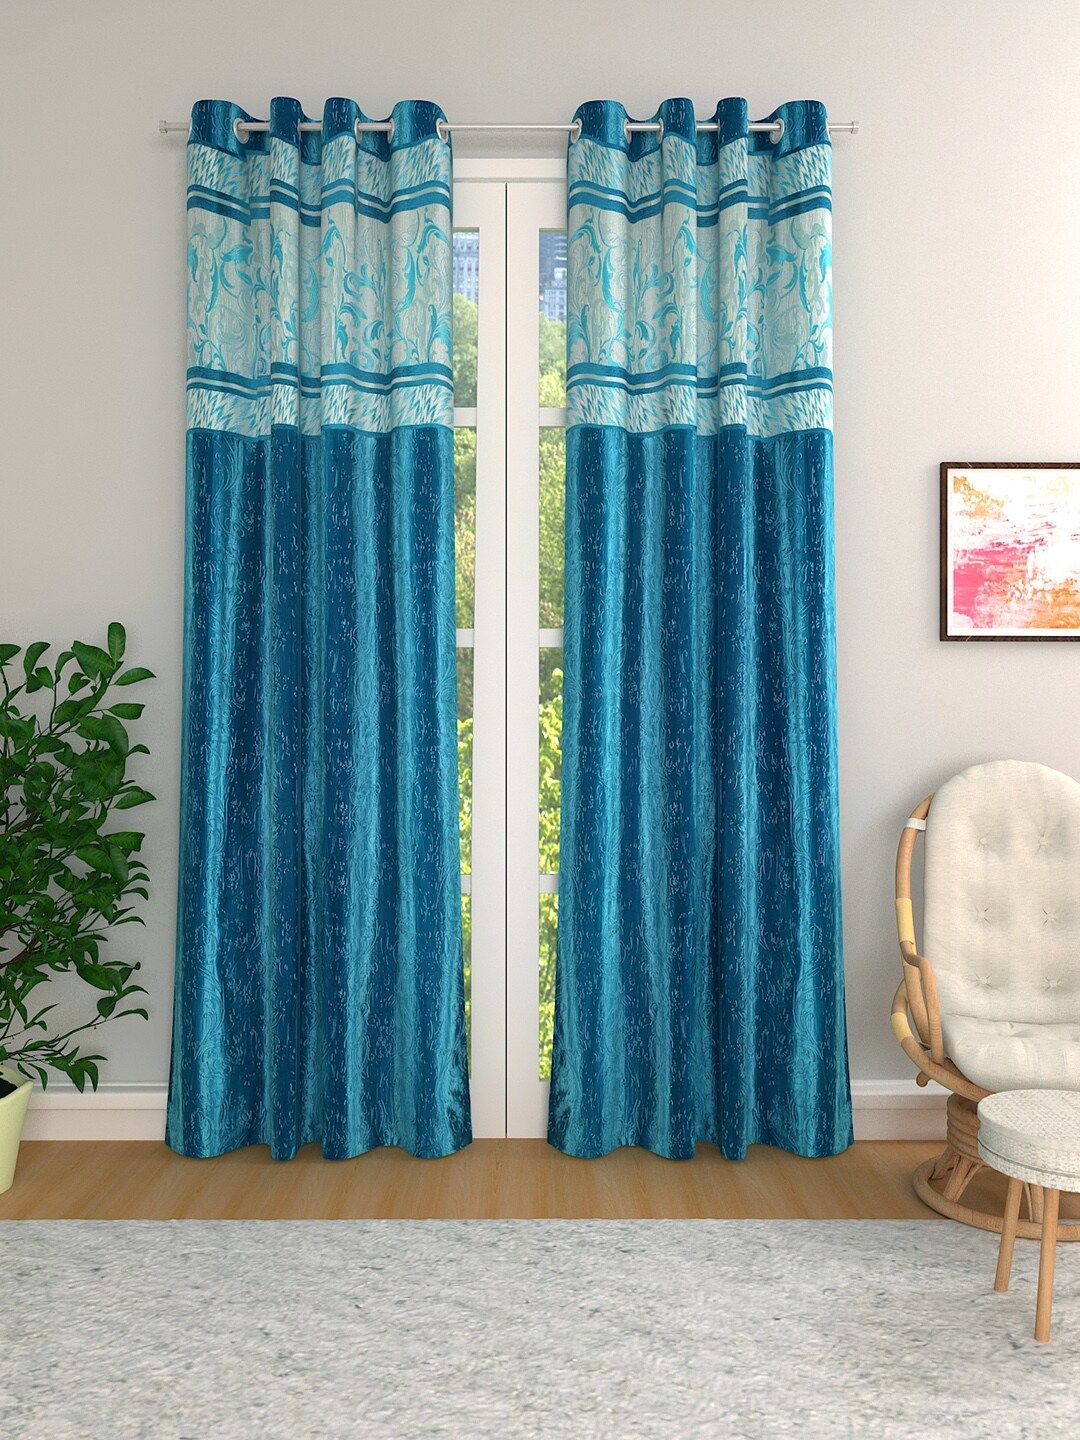 ROMEE Turquoise Blue & White Set of 2 Room Darkening Curtains Price in India